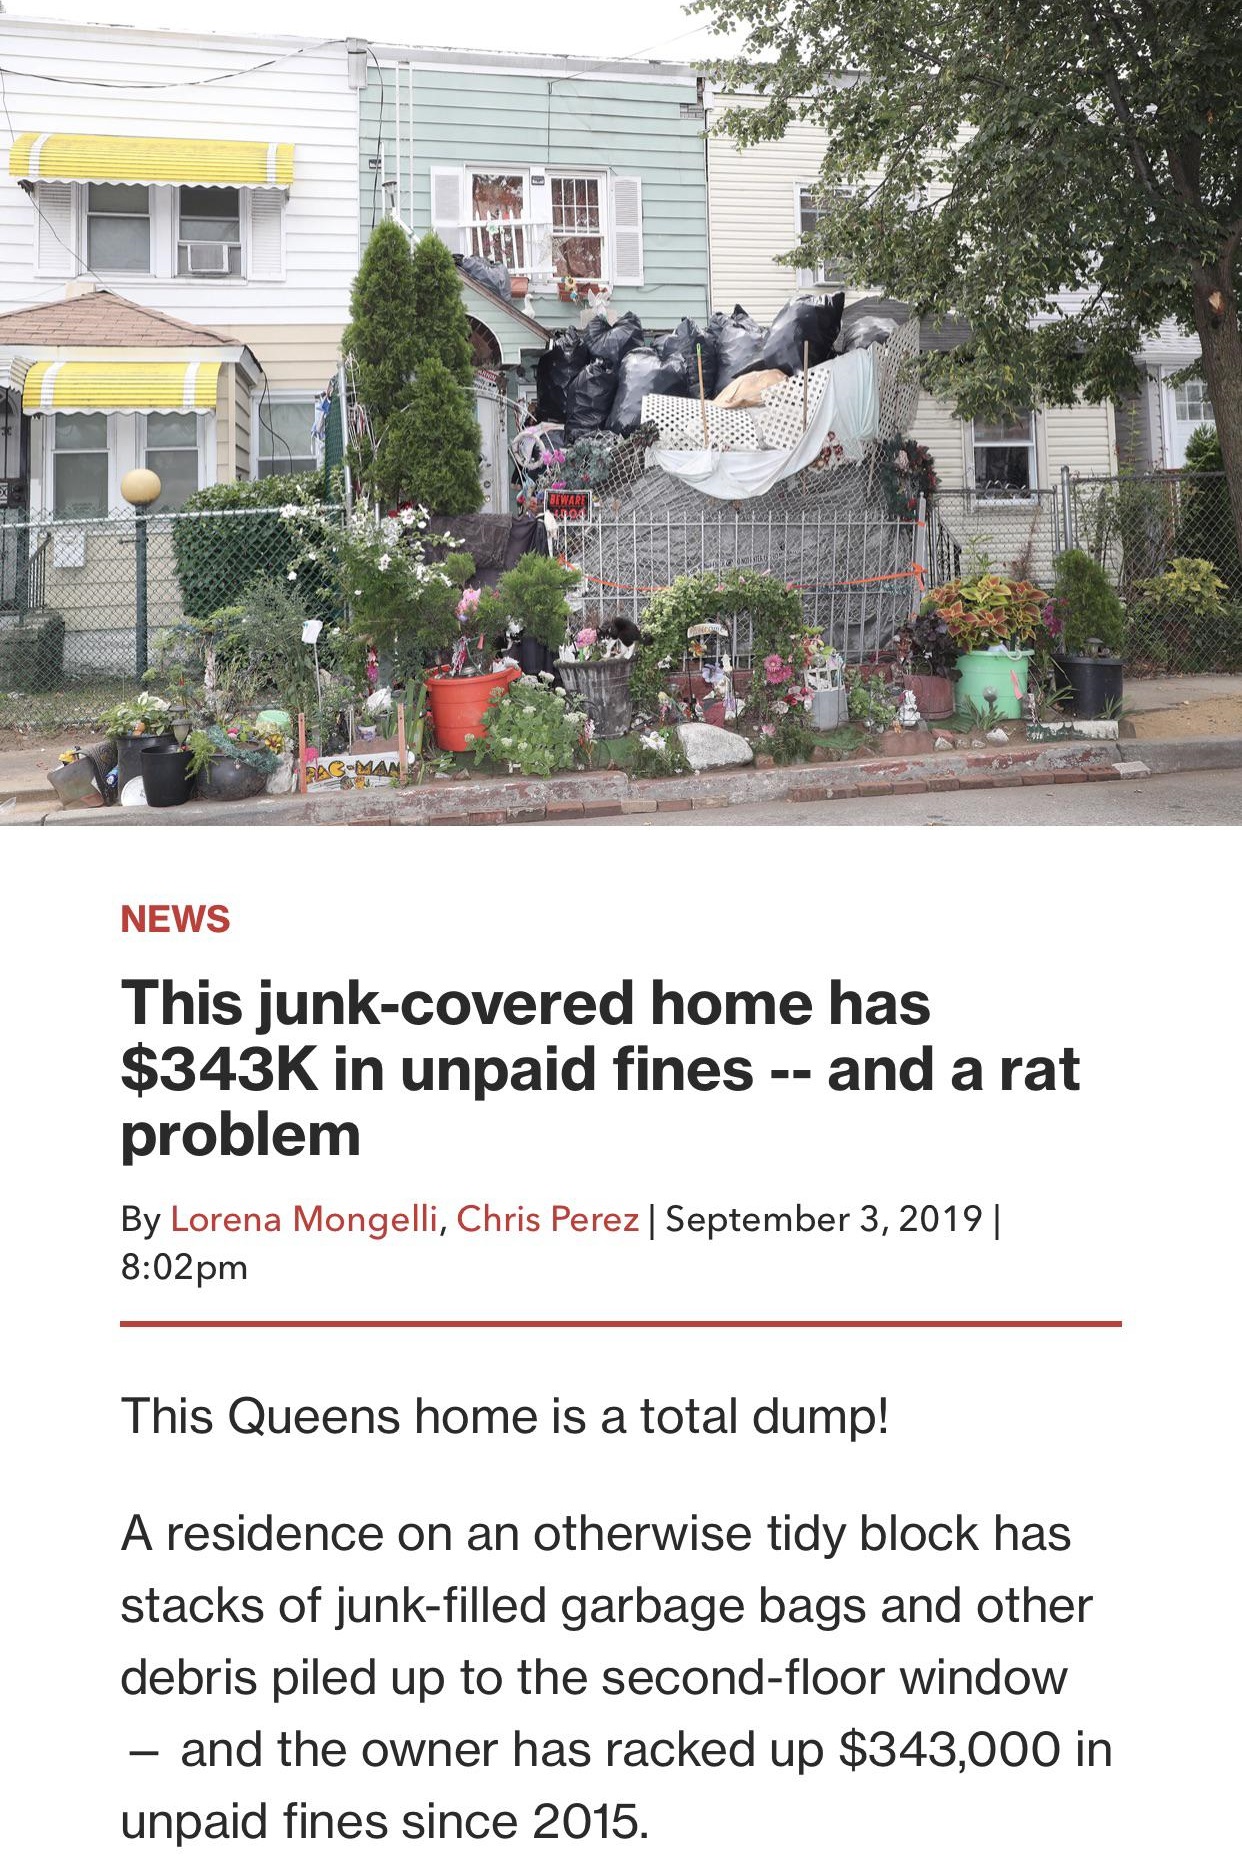 tree - News This junkcovered home has $ in unpaid fines and a rat problem By Lorena Mongelli, Chris Perez | This Queens home is a total dump! A residence on an otherwise tidy block has stacks of junkfilled garbage bags and other debris piled up to the sec